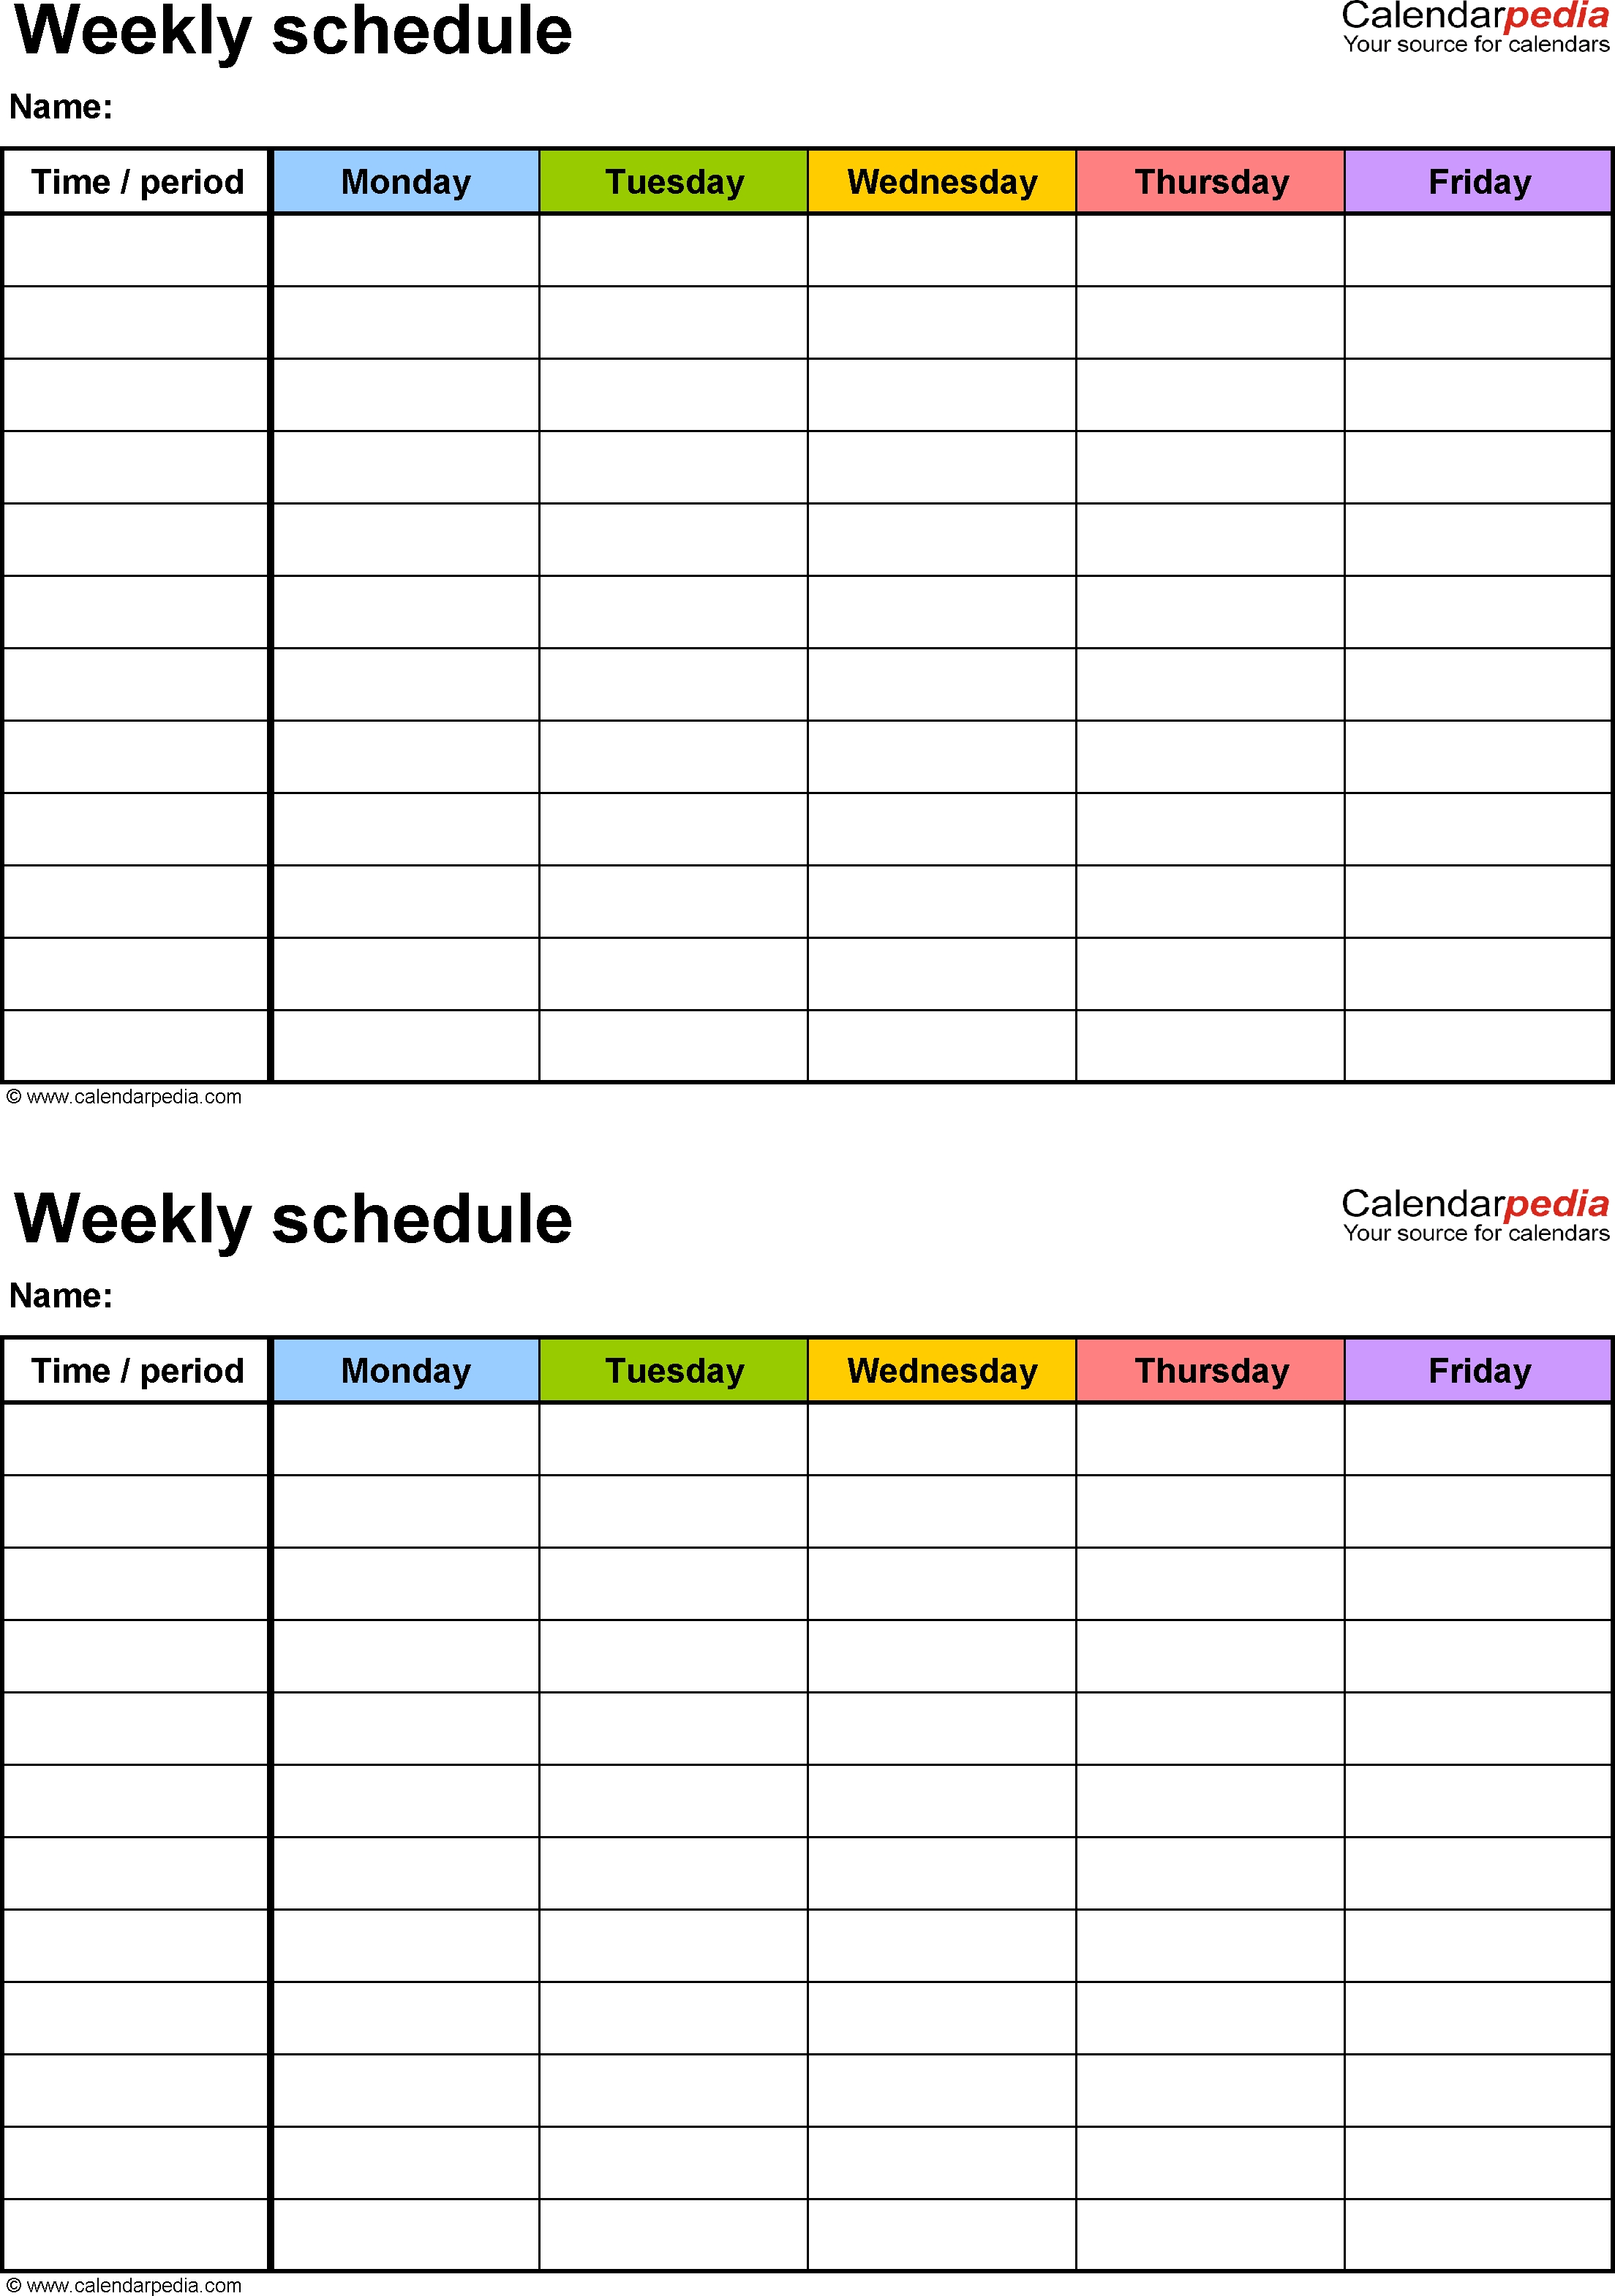 Free Weekly Schedule Templates For Word - 18 Templates-Monday To Friday Schedule Template